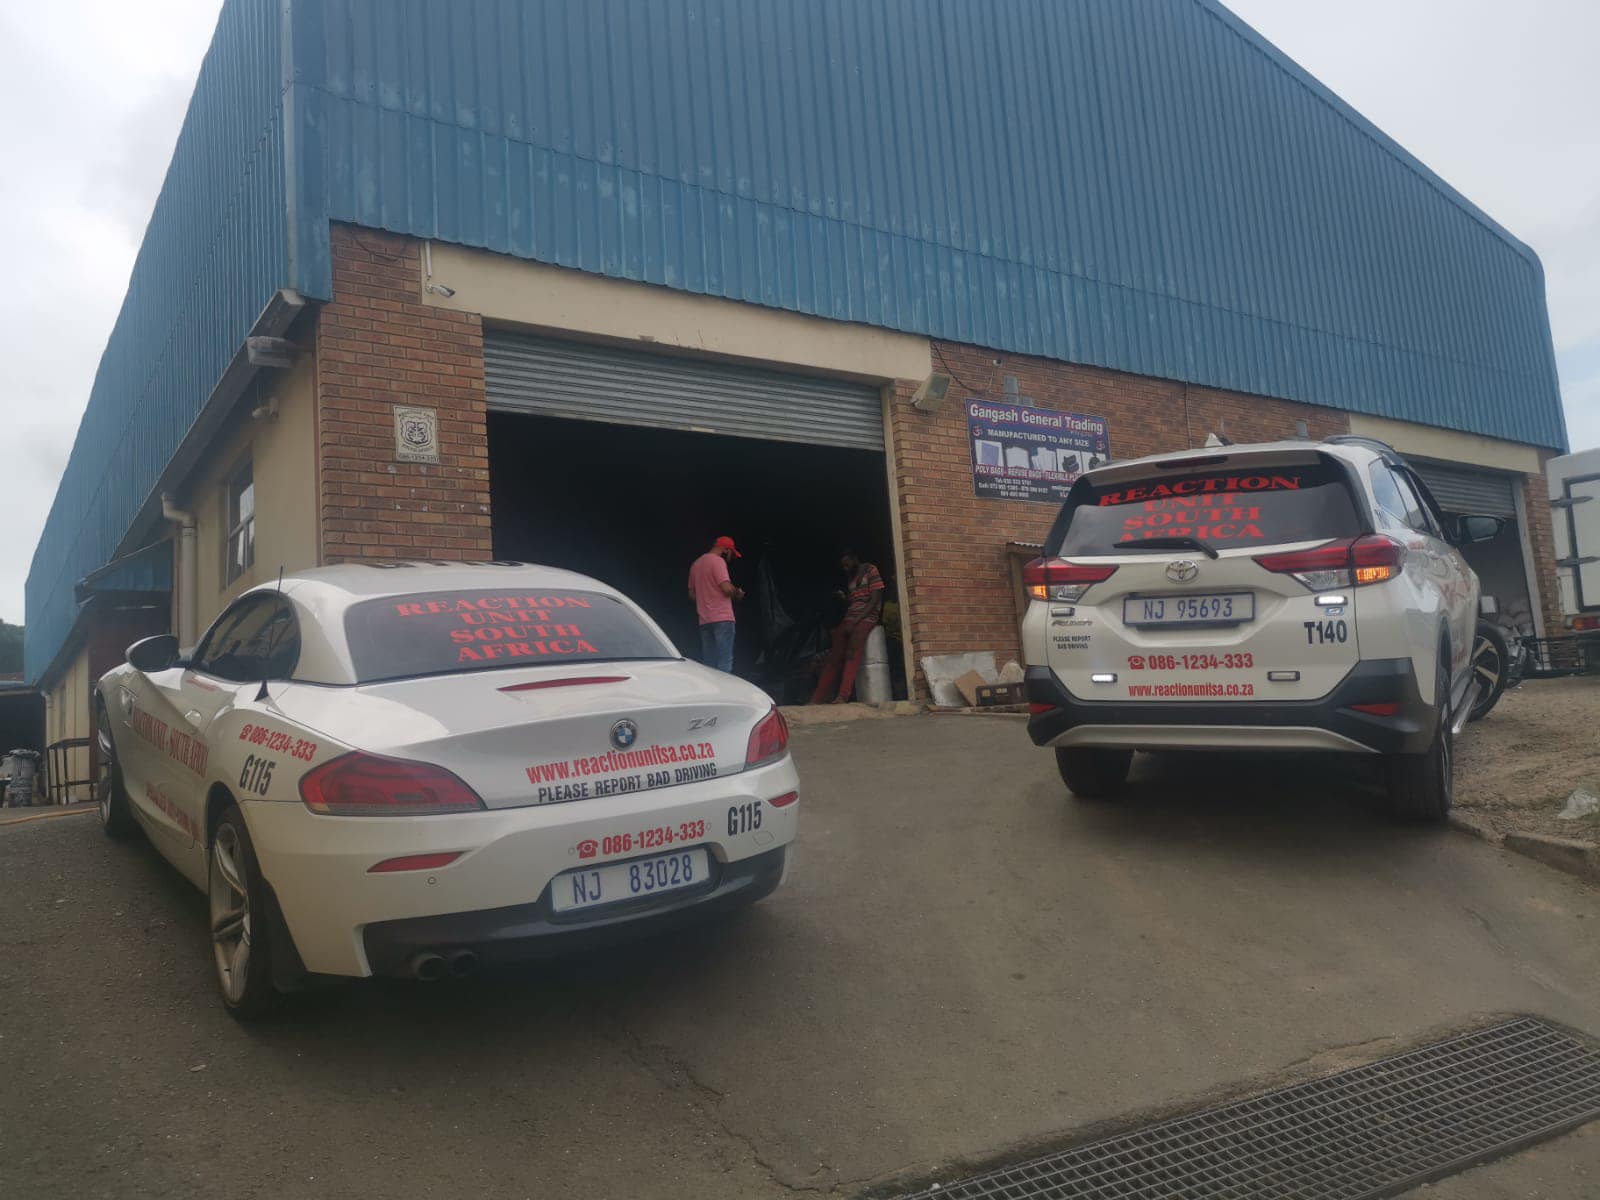 Armed robbery at a plastics factory on Riverview Road in Missionlands in Kwazulu Natal.